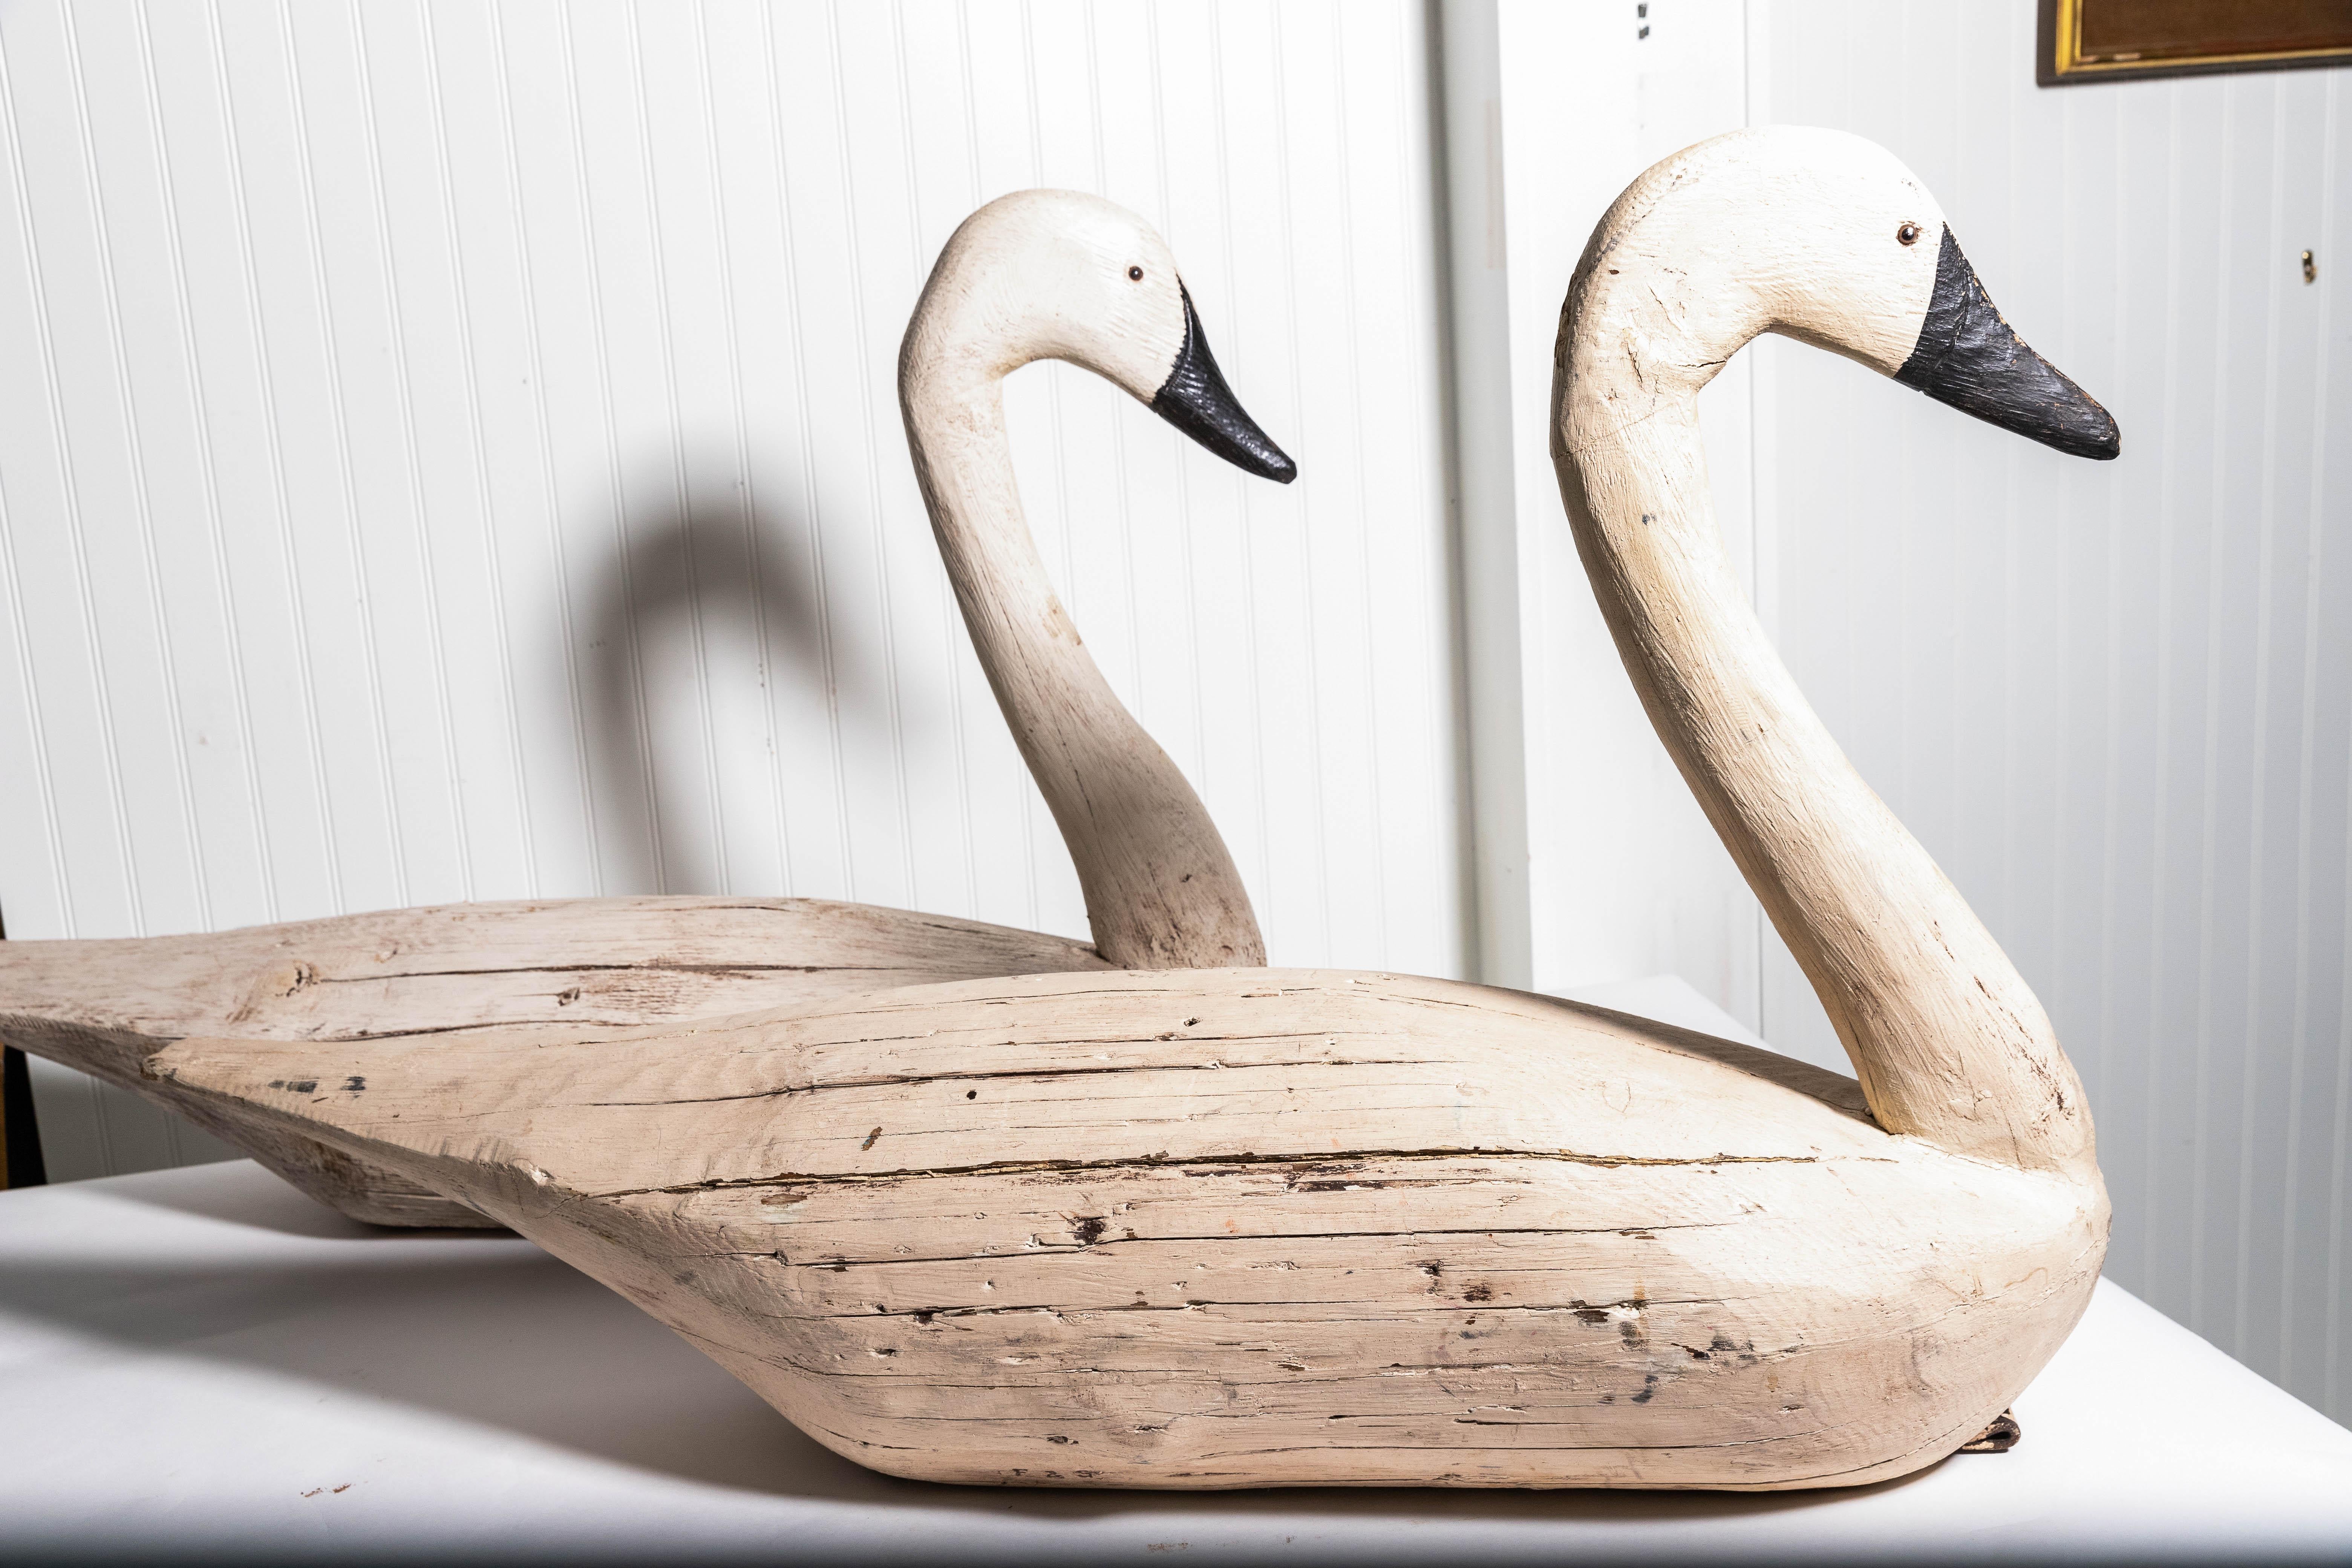 Pair of monumental swan decoys carved wood with glass eyes, leather toggle attachment for weight and small weight in bottoms. Signed on male F&S. Measures: Female 40.5 inch long 27 inches high 10 inches wide.